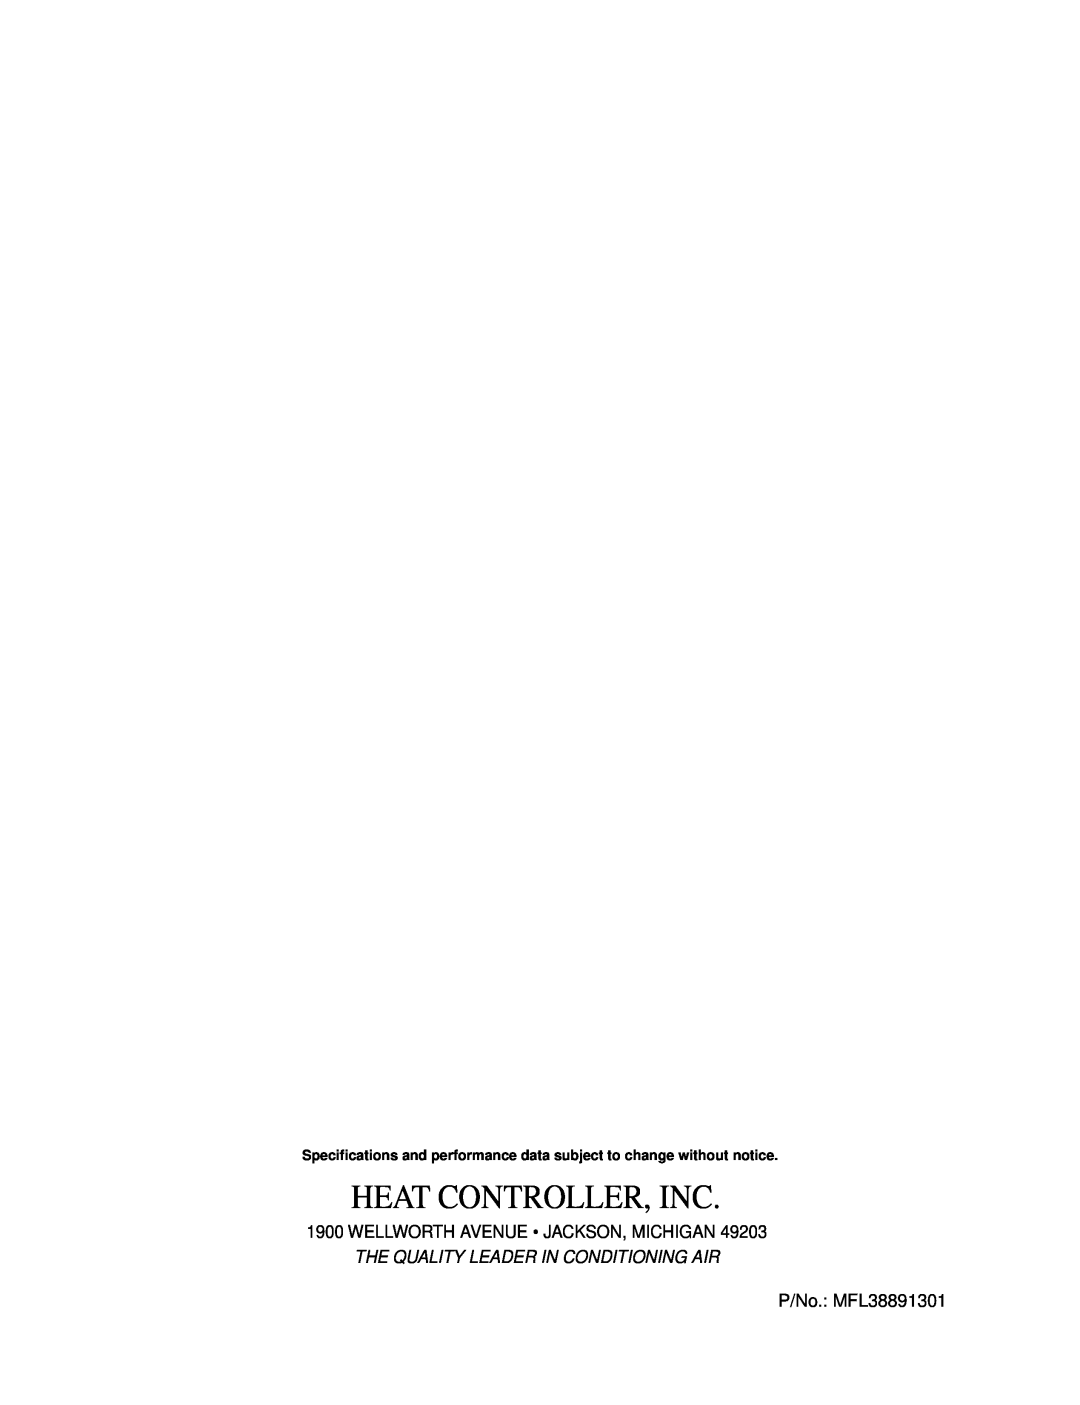 Heat Controller BHD-501-B The Quality Leader In Conditioning Air, Heat Controller, Inc, Wellworth Avenue Jackson, Michigan 